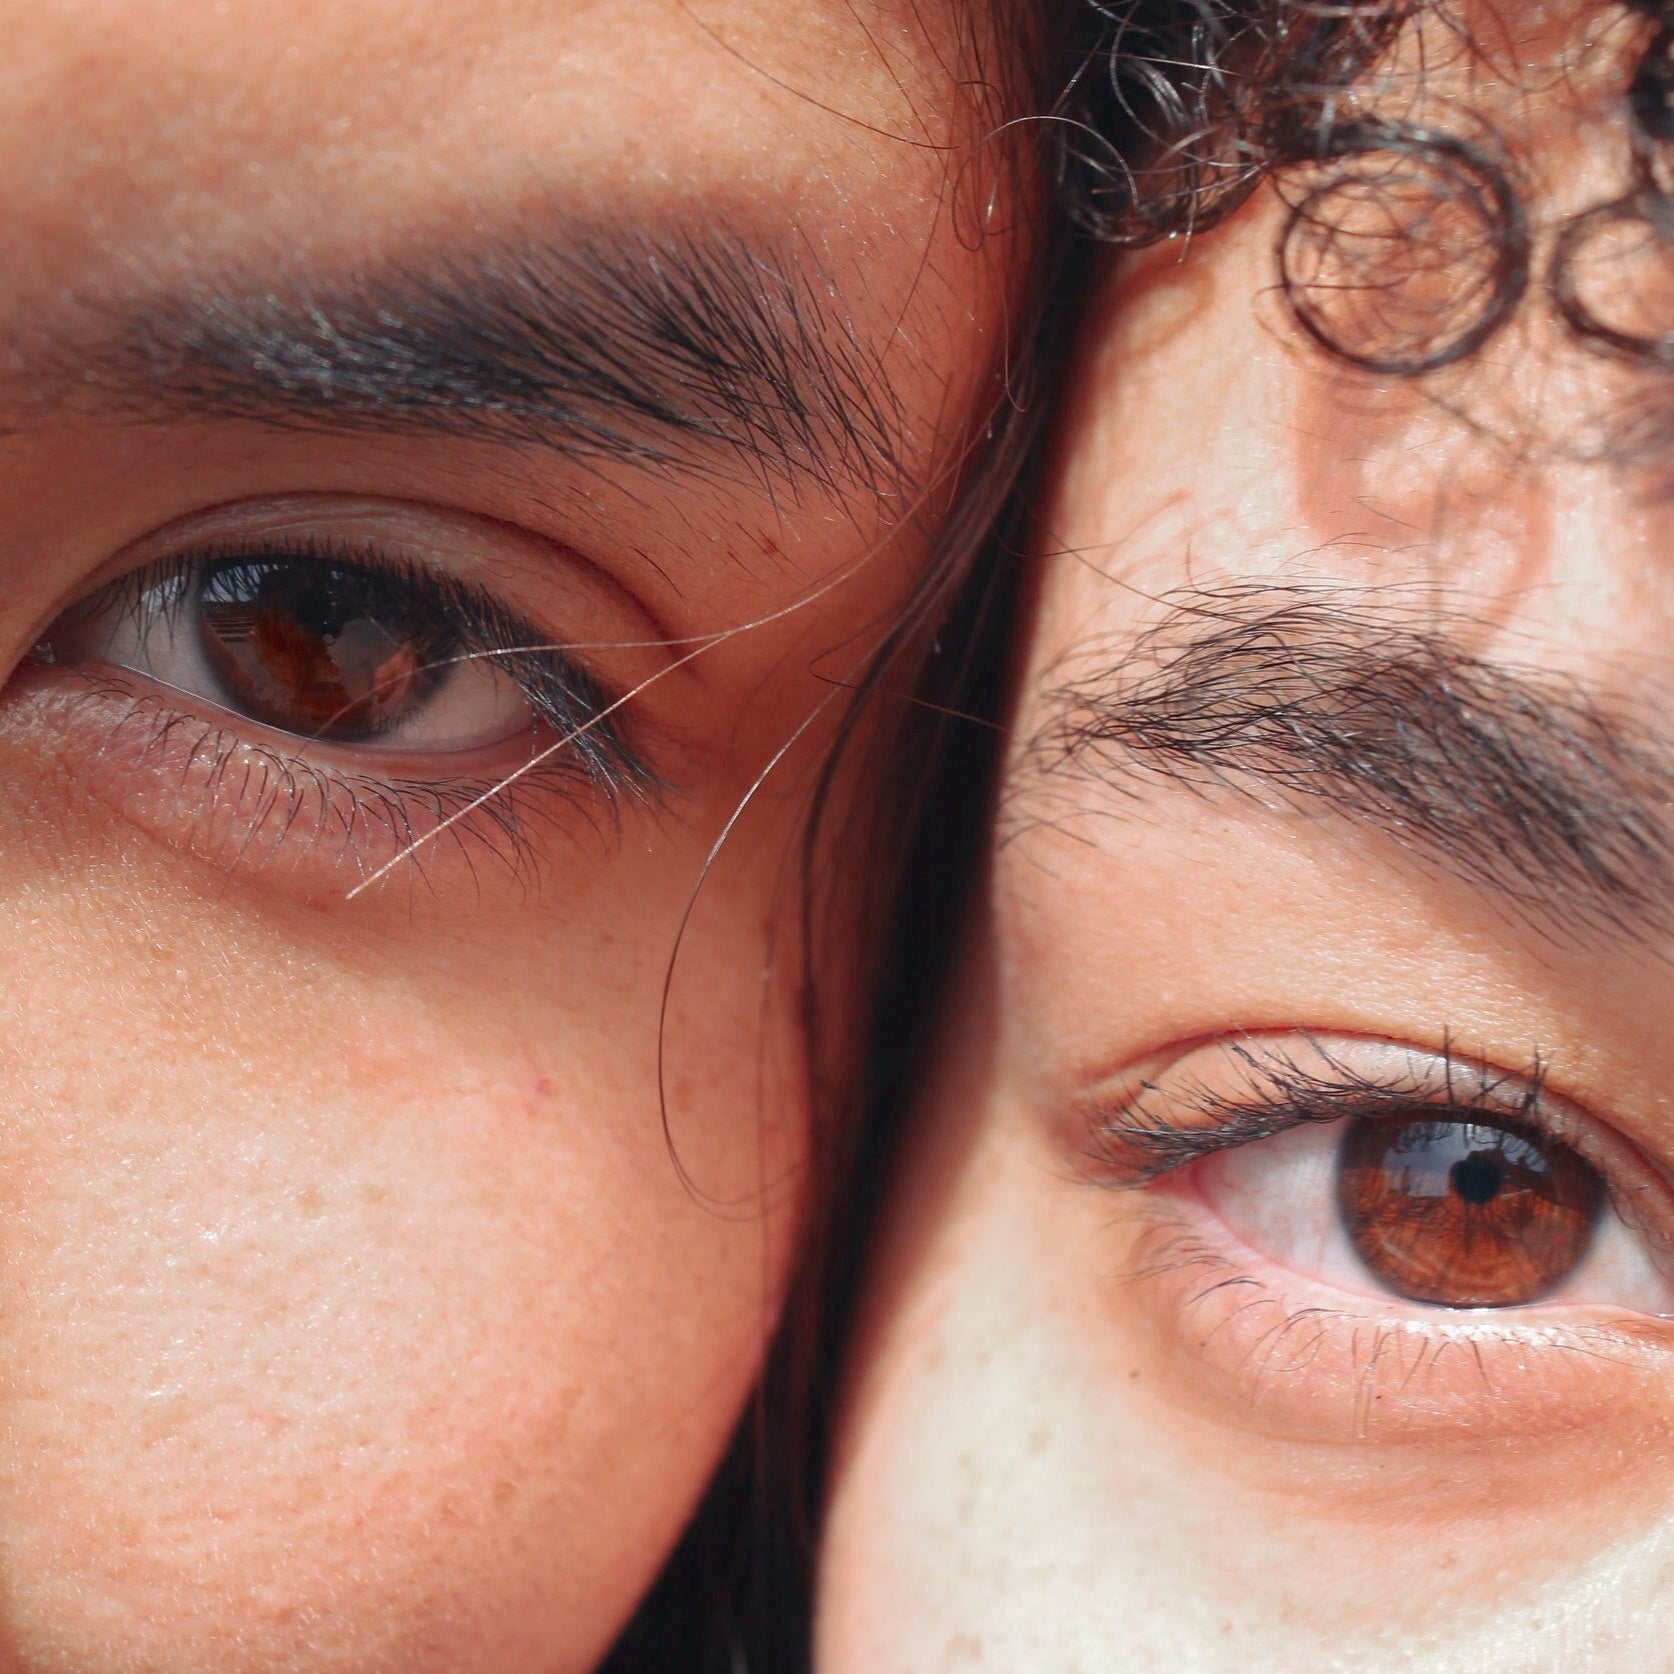 Two women's eyes and eyebrows / Pexels / Raquel